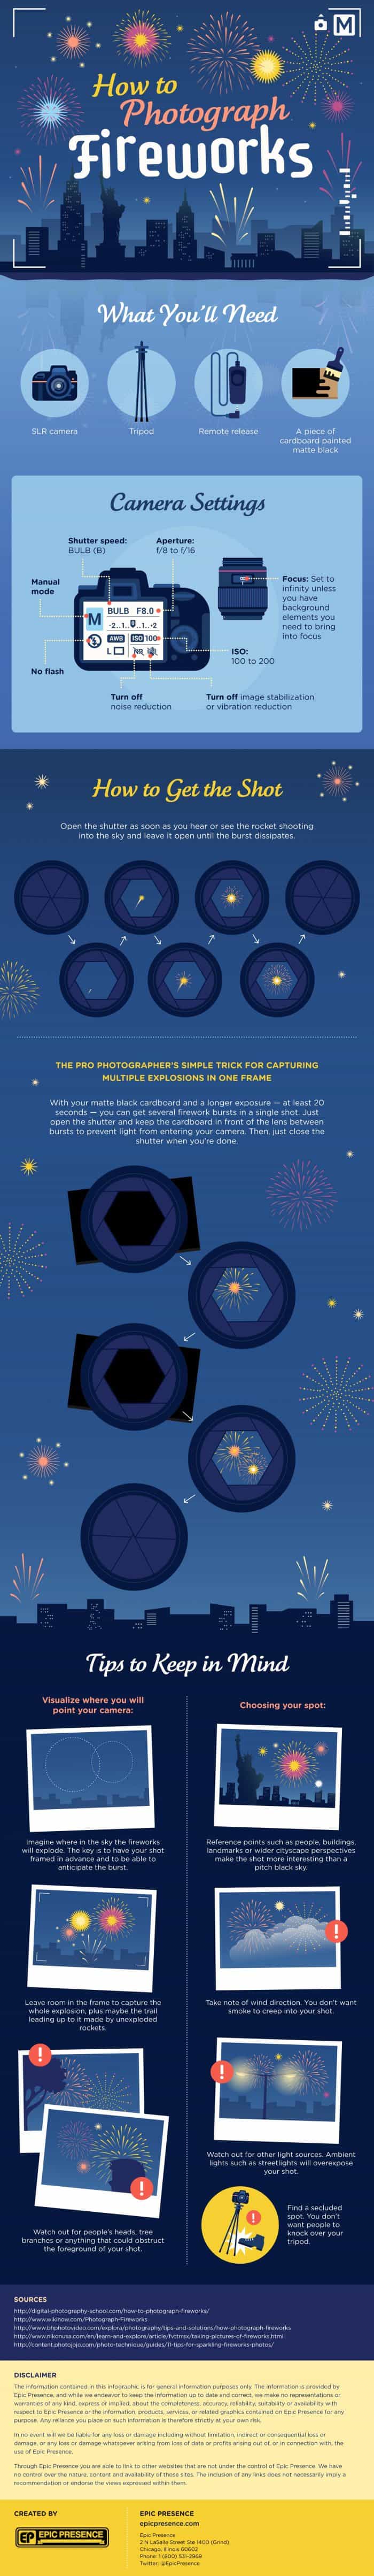 Here’s How To Take Amazing Pictures Of Fireworks On Independence Day